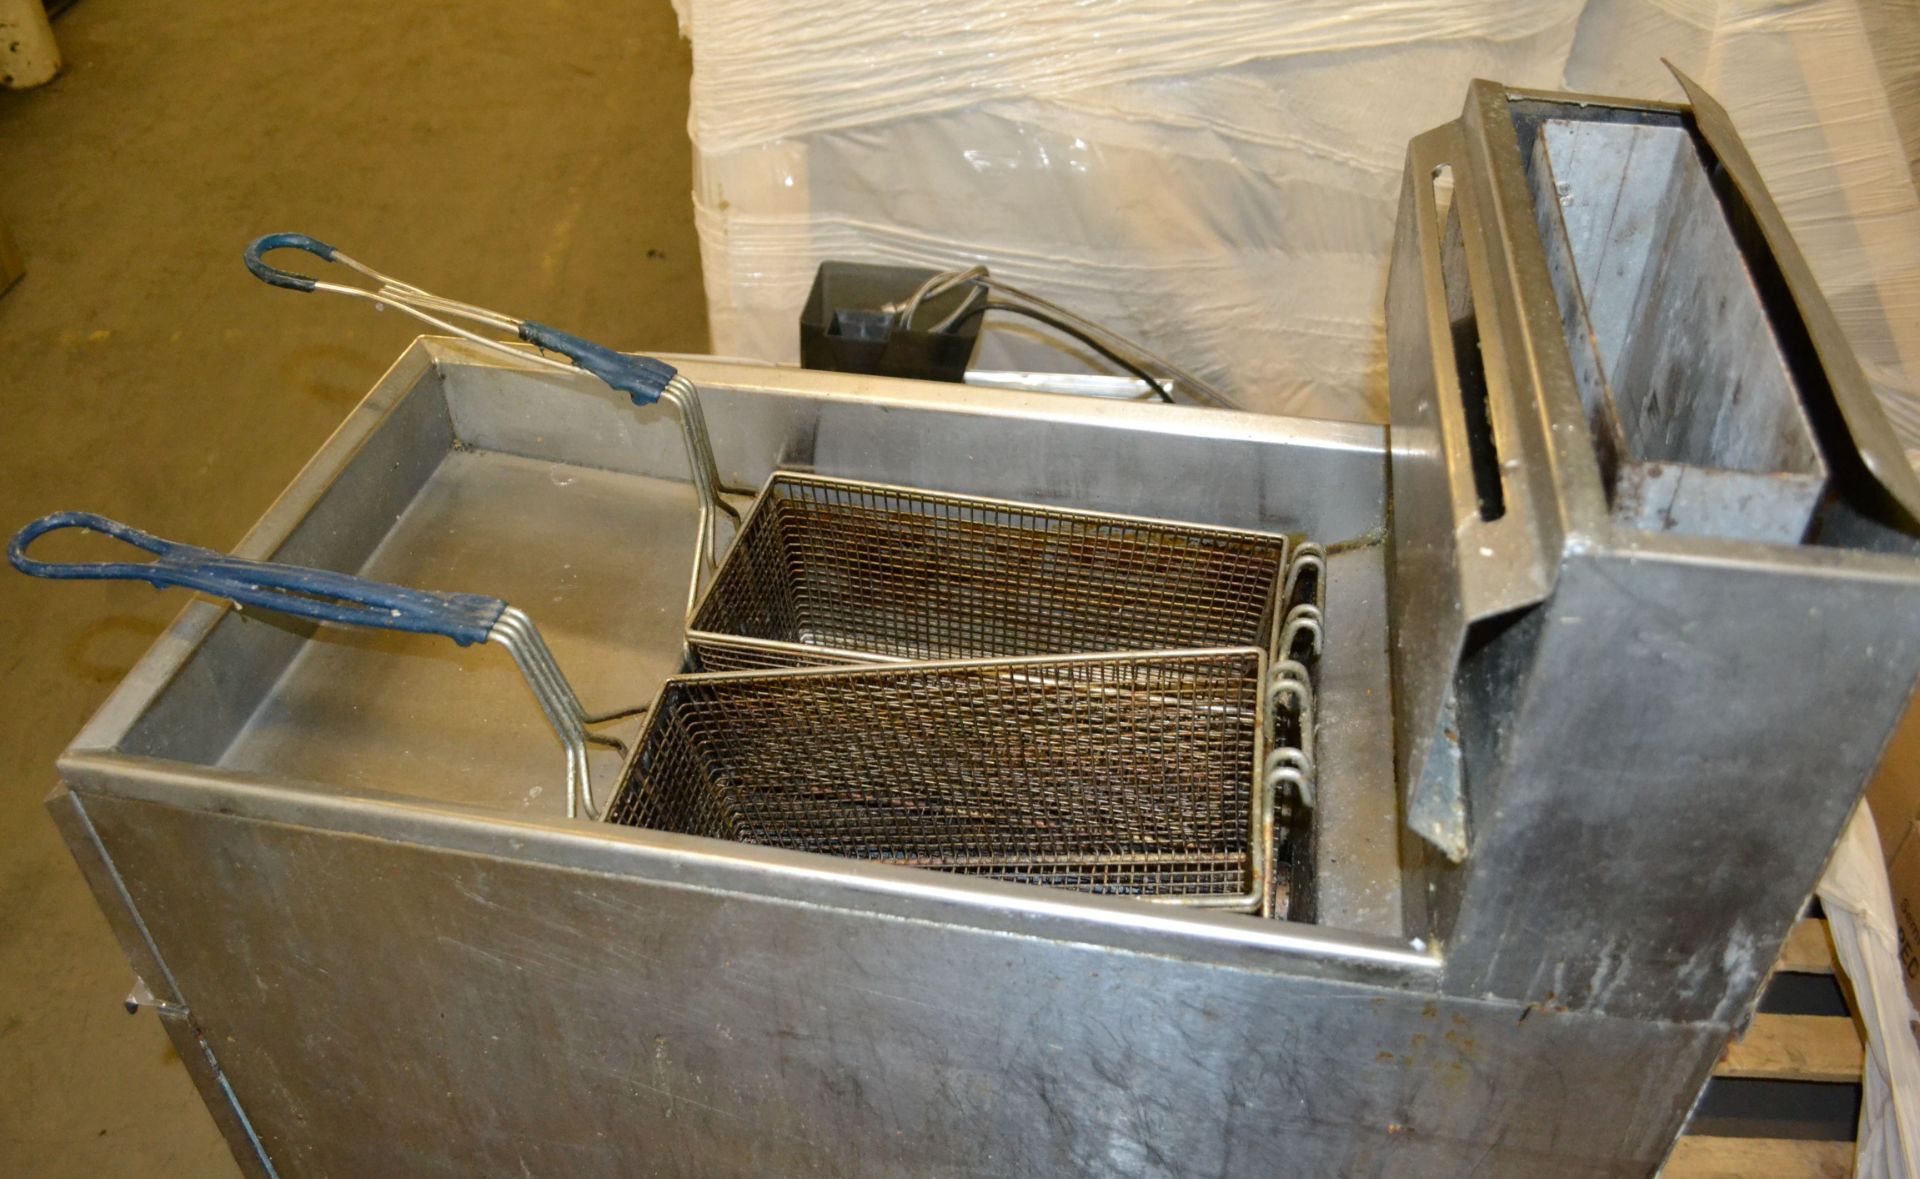 1 x Elite IFS-40 Free Standing Twin Basket Gas Fryer - Ref: FJC009 - CL124 - Location: Bolton - Image 6 of 6